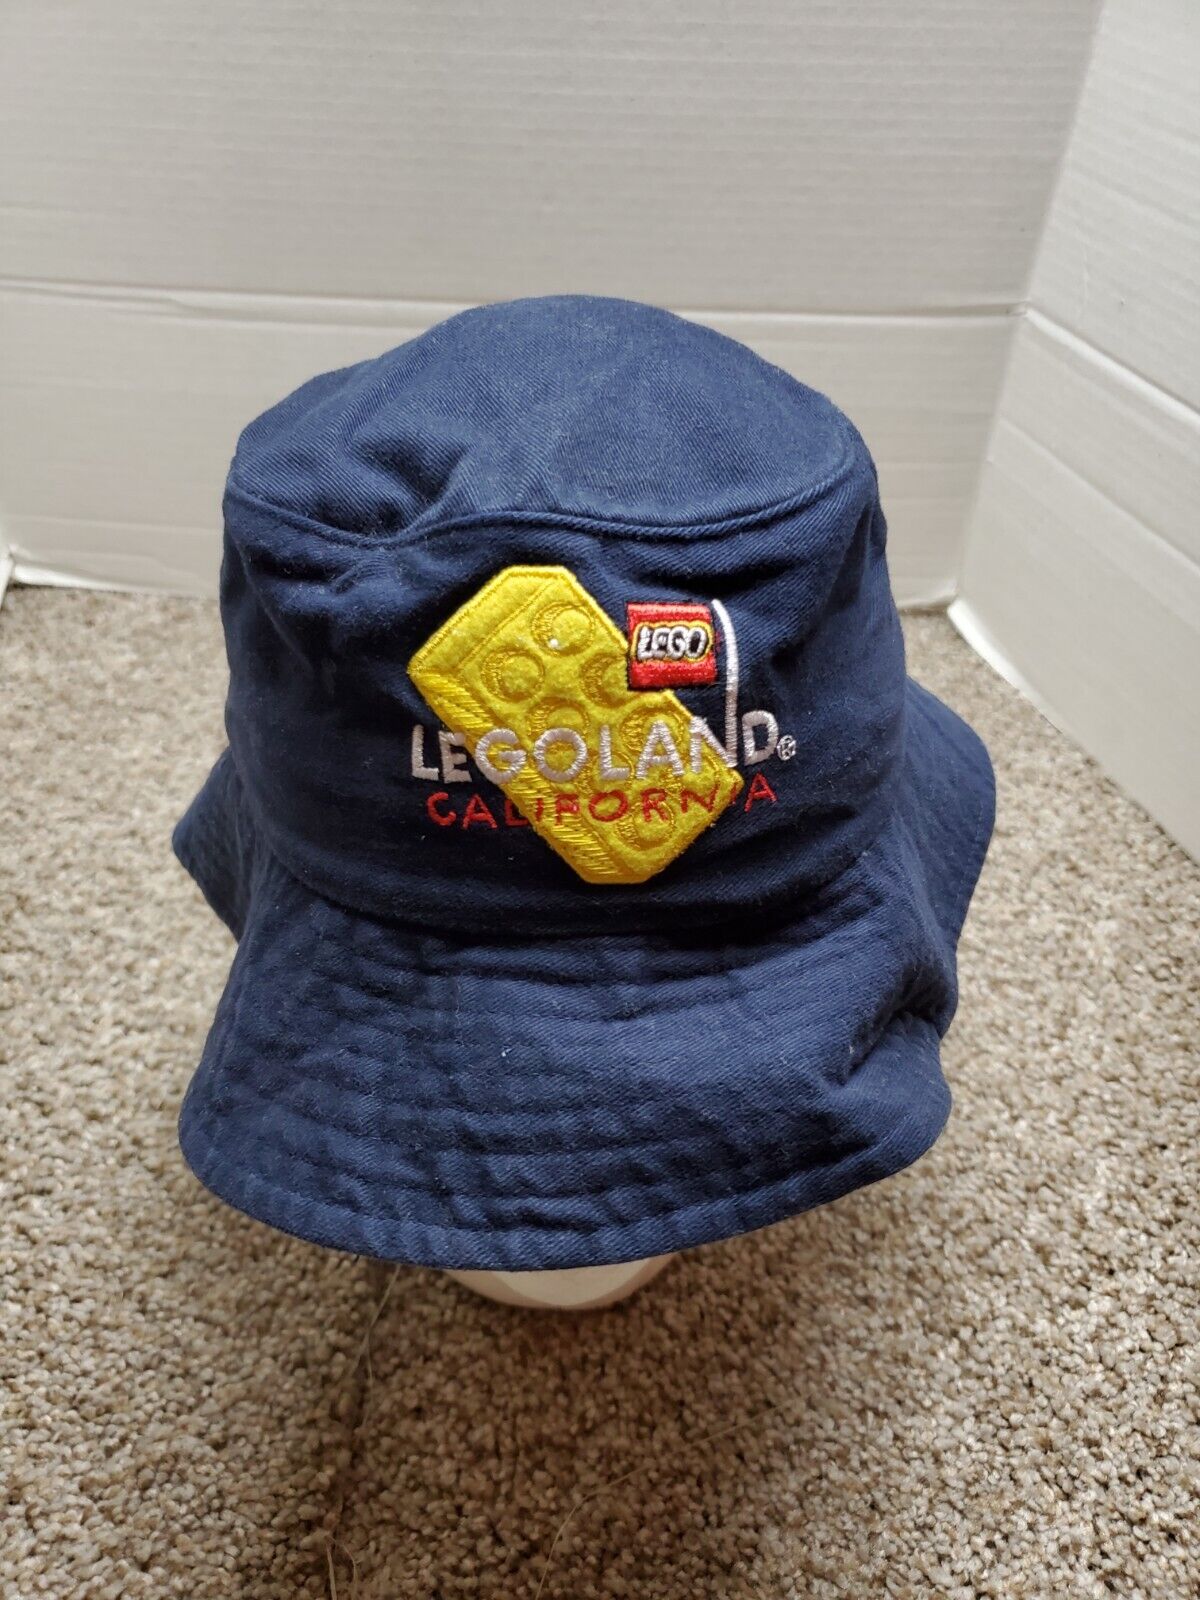 LEGOLAND California Bucket Hat Youth One Size Blue Embroidered Cotton